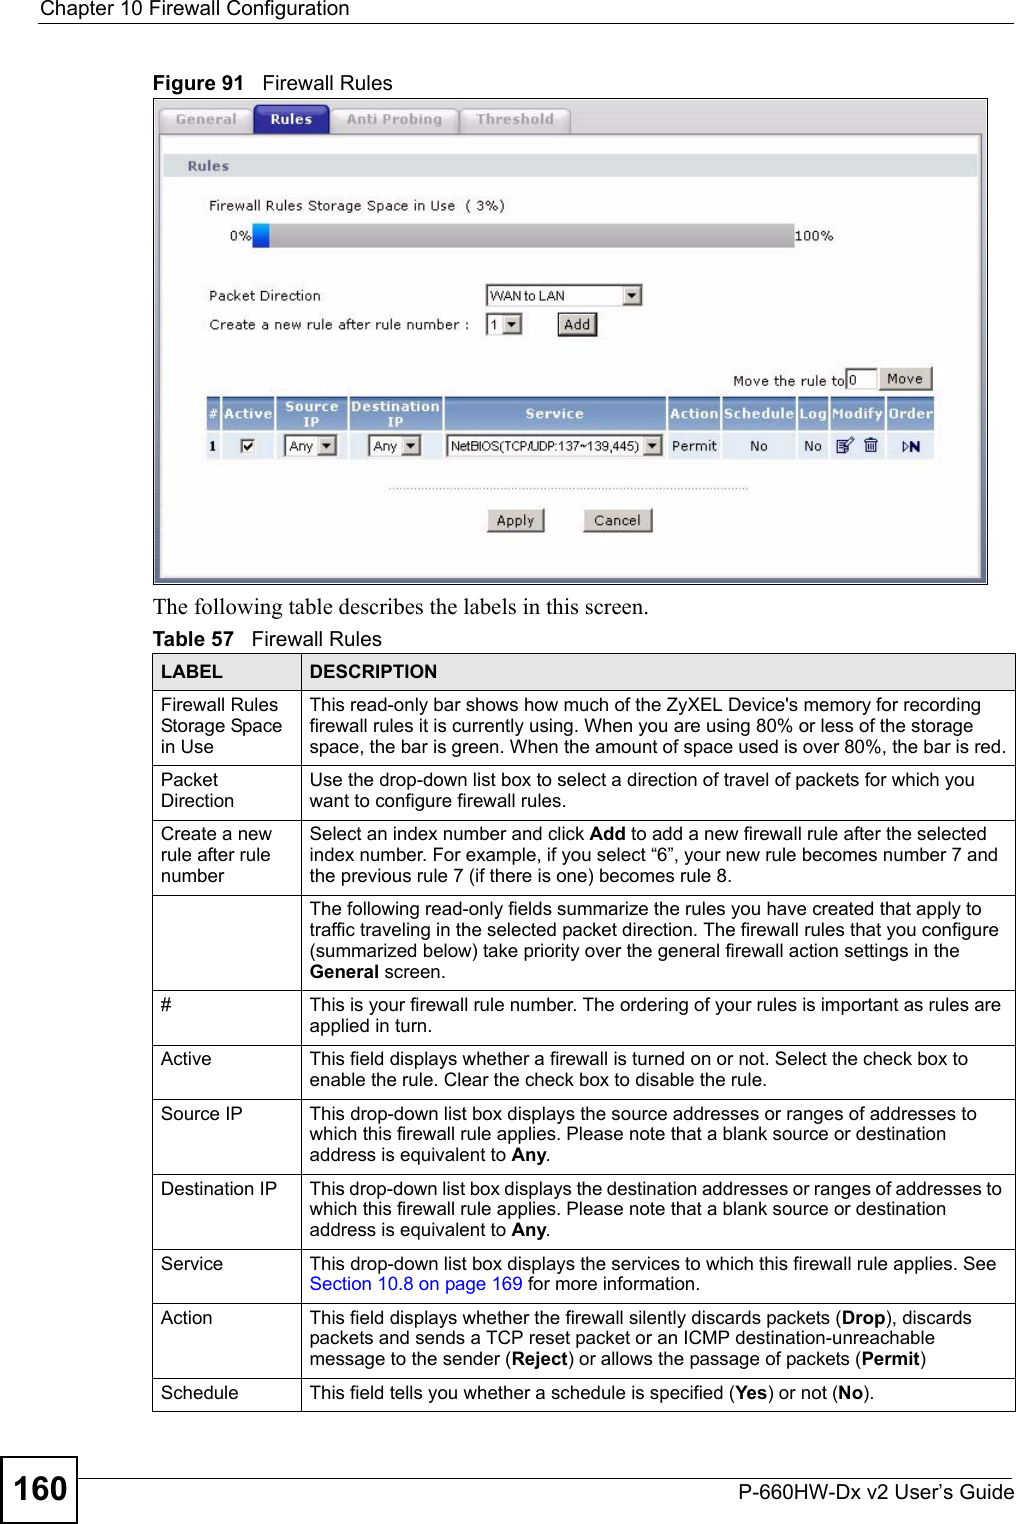 Chapter 10 Firewall ConfigurationP-660HW-Dx v2 User’s Guide160Figure 91   Firewall Rules The following table describes the labels in this screen. Table 57   Firewall RulesLABEL DESCRIPTIONFirewall Rules Storage Space in UseThis read-only bar shows how much of the ZyXEL Device&apos;s memory for recording firewall rules it is currently using. When you are using 80% or less of the storage space, the bar is green. When the amount of space used is over 80%, the bar is red.Packet DirectionUse the drop-down list box to select a direction of travel of packets for which you want to configure firewall rules.Create a new rule after rule number Select an index number and click Add to add a new firewall rule after the selected index number. For example, if you select “6”, your new rule becomes number 7 and the previous rule 7 (if there is one) becomes rule 8.The following read-only fields summarize the rules you have created that apply to traffic traveling in the selected packet direction. The firewall rules that you configure (summarized below) take priority over the general firewall action settings in the General screen.#This is your firewall rule number. The ordering of your rules is important as rules are applied in turn. Active This field displays whether a firewall is turned on or not. Select the check box to enable the rule. Clear the check box to disable the rule.Source IP This drop-down list box displays the source addresses or ranges of addresses to which this firewall rule applies. Please note that a blank source or destination address is equivalent to Any.Destination IP This drop-down list box displays the destination addresses or ranges of addresses to which this firewall rule applies. Please note that a blank source or destination address is equivalent to Any.Service  This drop-down list box displays the services to which this firewall rule applies. See Section 10.8 on page 169 for more information.Action This field displays whether the firewall silently discards packets (Drop), discards packets and sends a TCP reset packet or an ICMP destination-unreachable message to the sender (Reject) or allows the passage of packets (Permit)Schedule This field tells you whether a schedule is specified (Yes) or not (No).